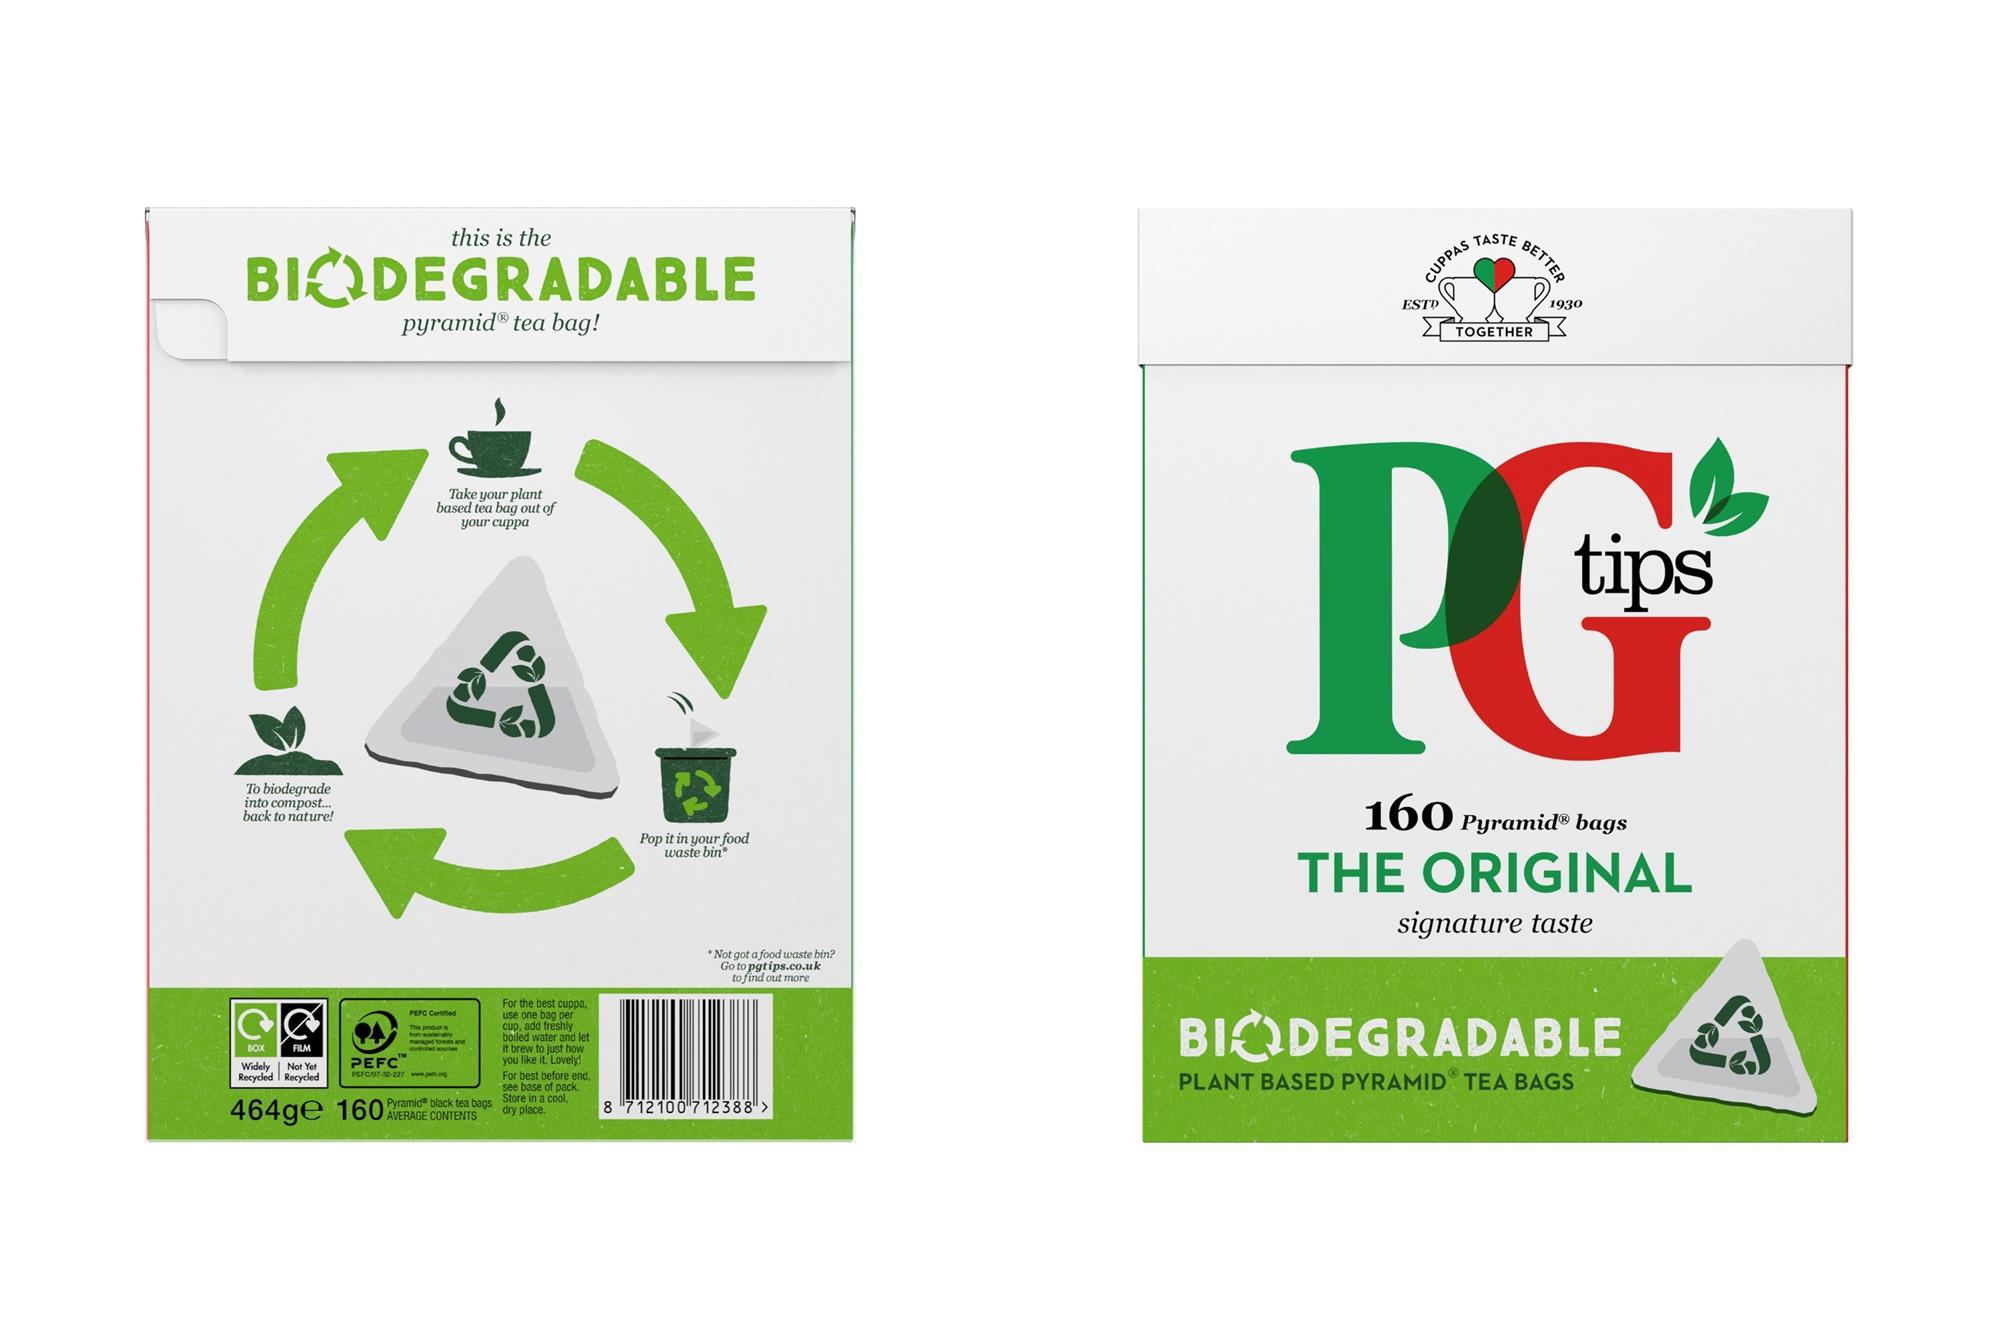 PG Tips ditches plastic in switch to biodegradable teabags, News